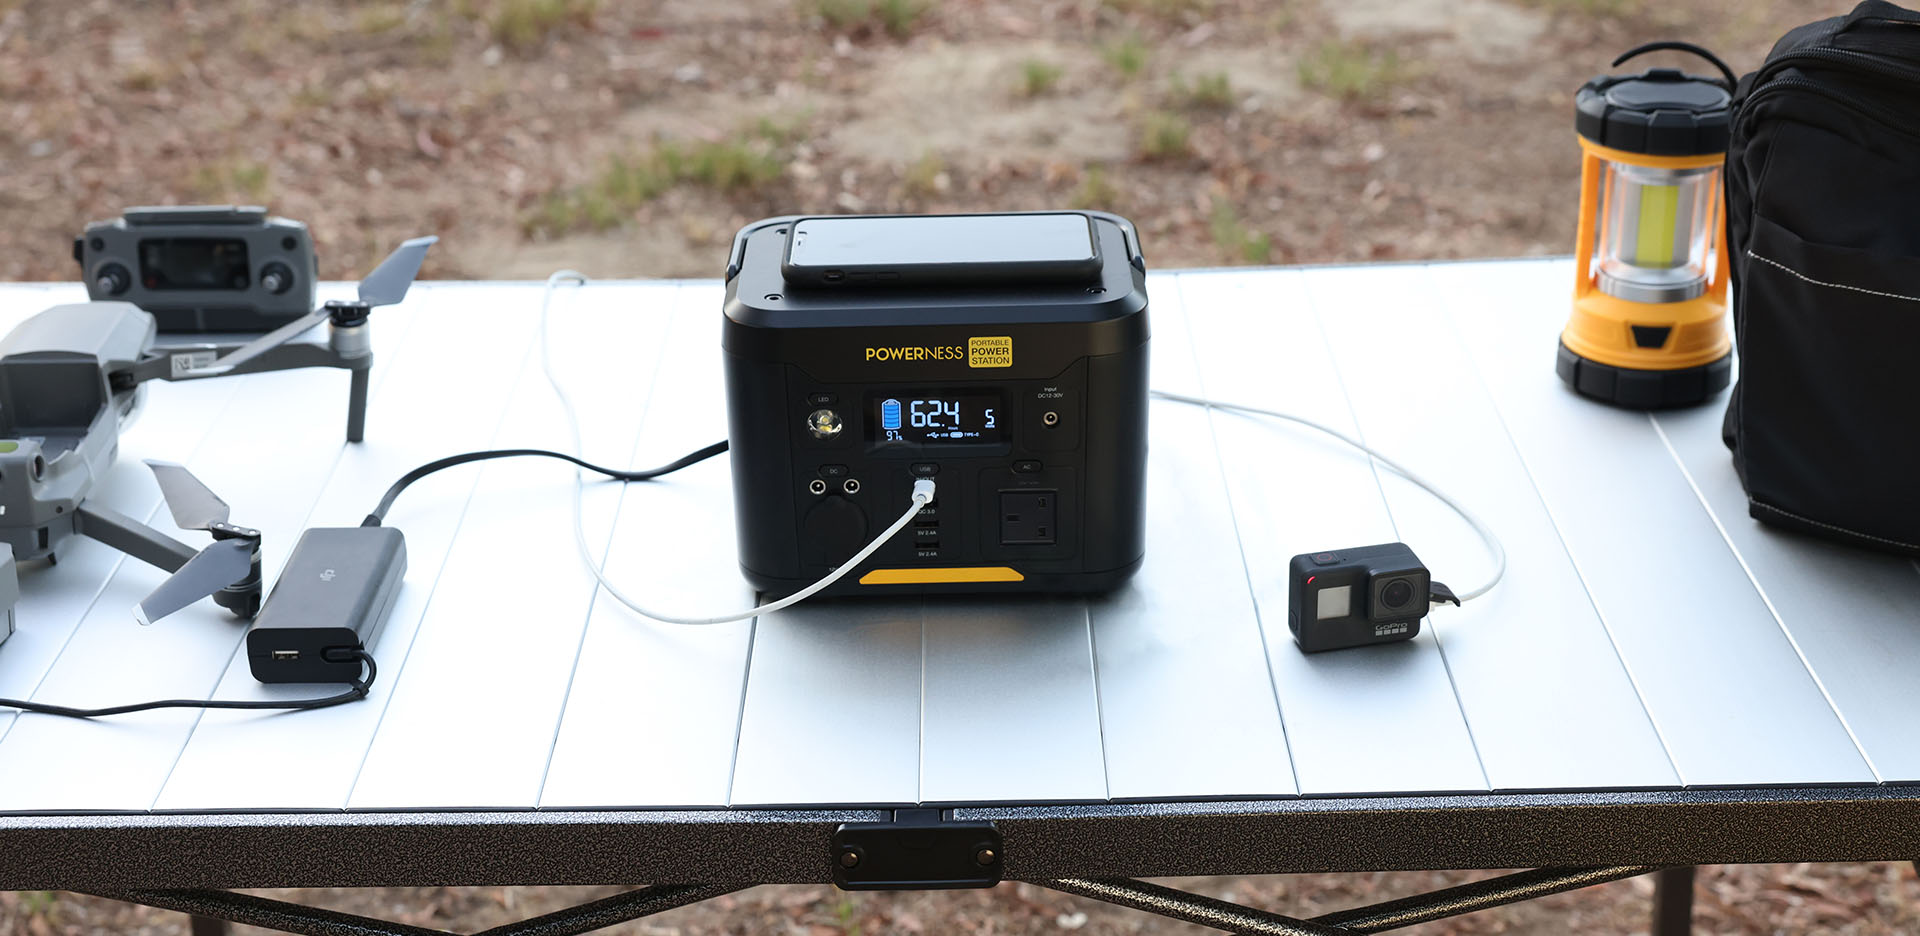 Powerness Hiker U300: Reliable power for photographic devices and drone on an outdoor table. Solar Energy Generator